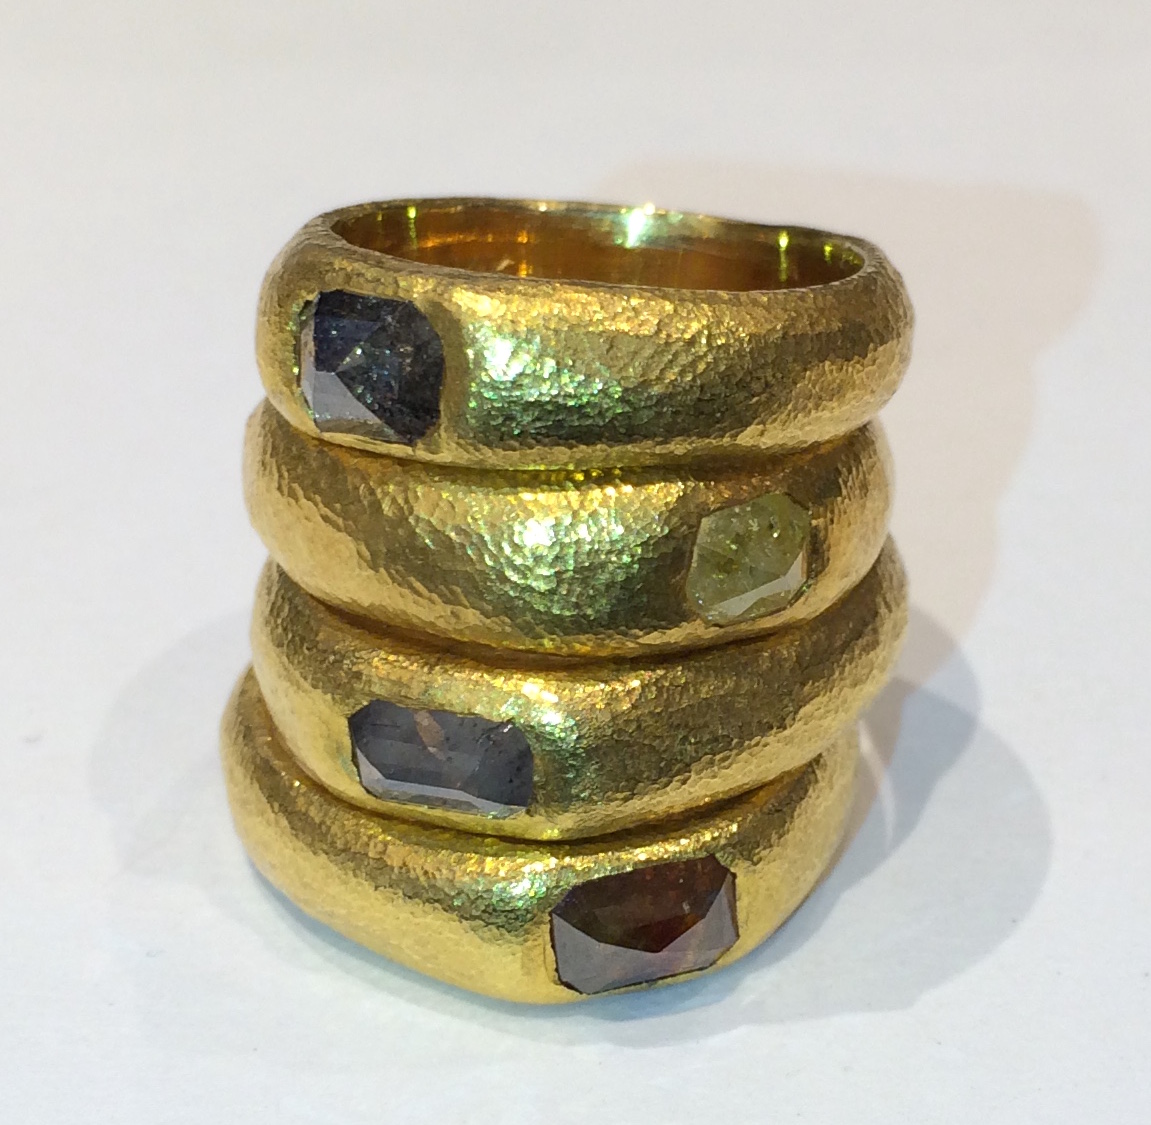 Neil Lane, Hand wrought 14K yellow gold rings with high carat gold plating set with table cut colored diamonds, signed, c. 2010